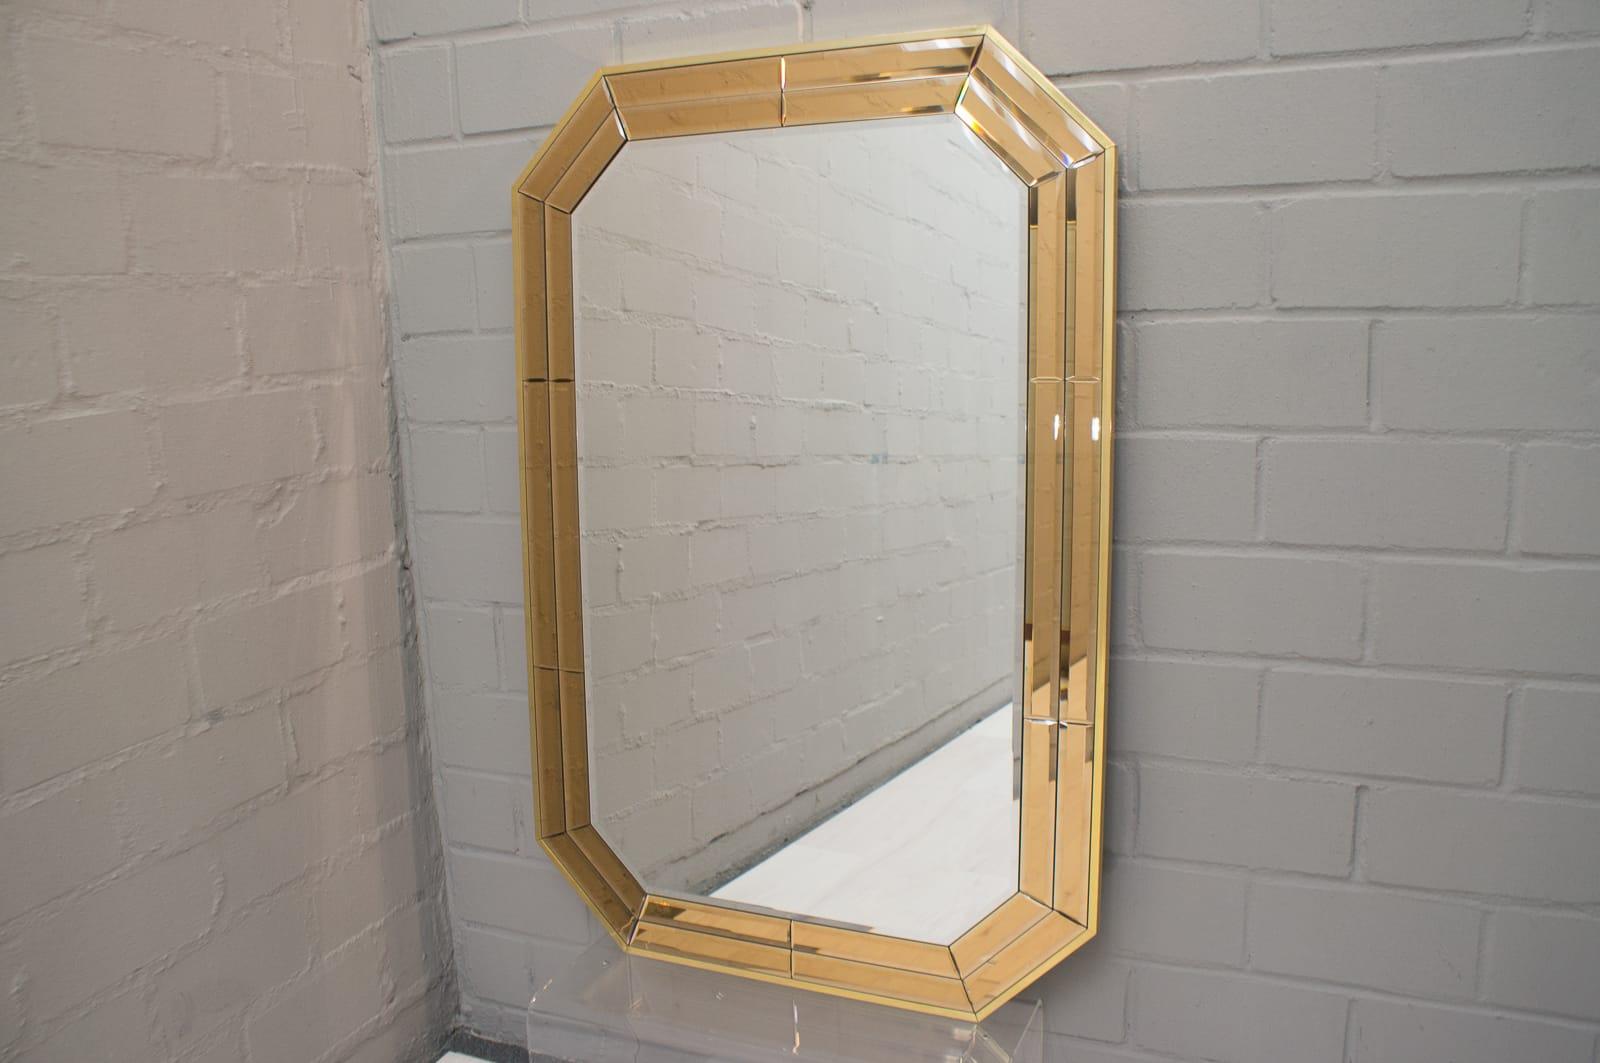 Massive and large wall mirror with faceted stained glass in brass frame. Manufactured by Schönninger, Germany. Very high quality work, 1960s. Can be hung upright and crosswise.